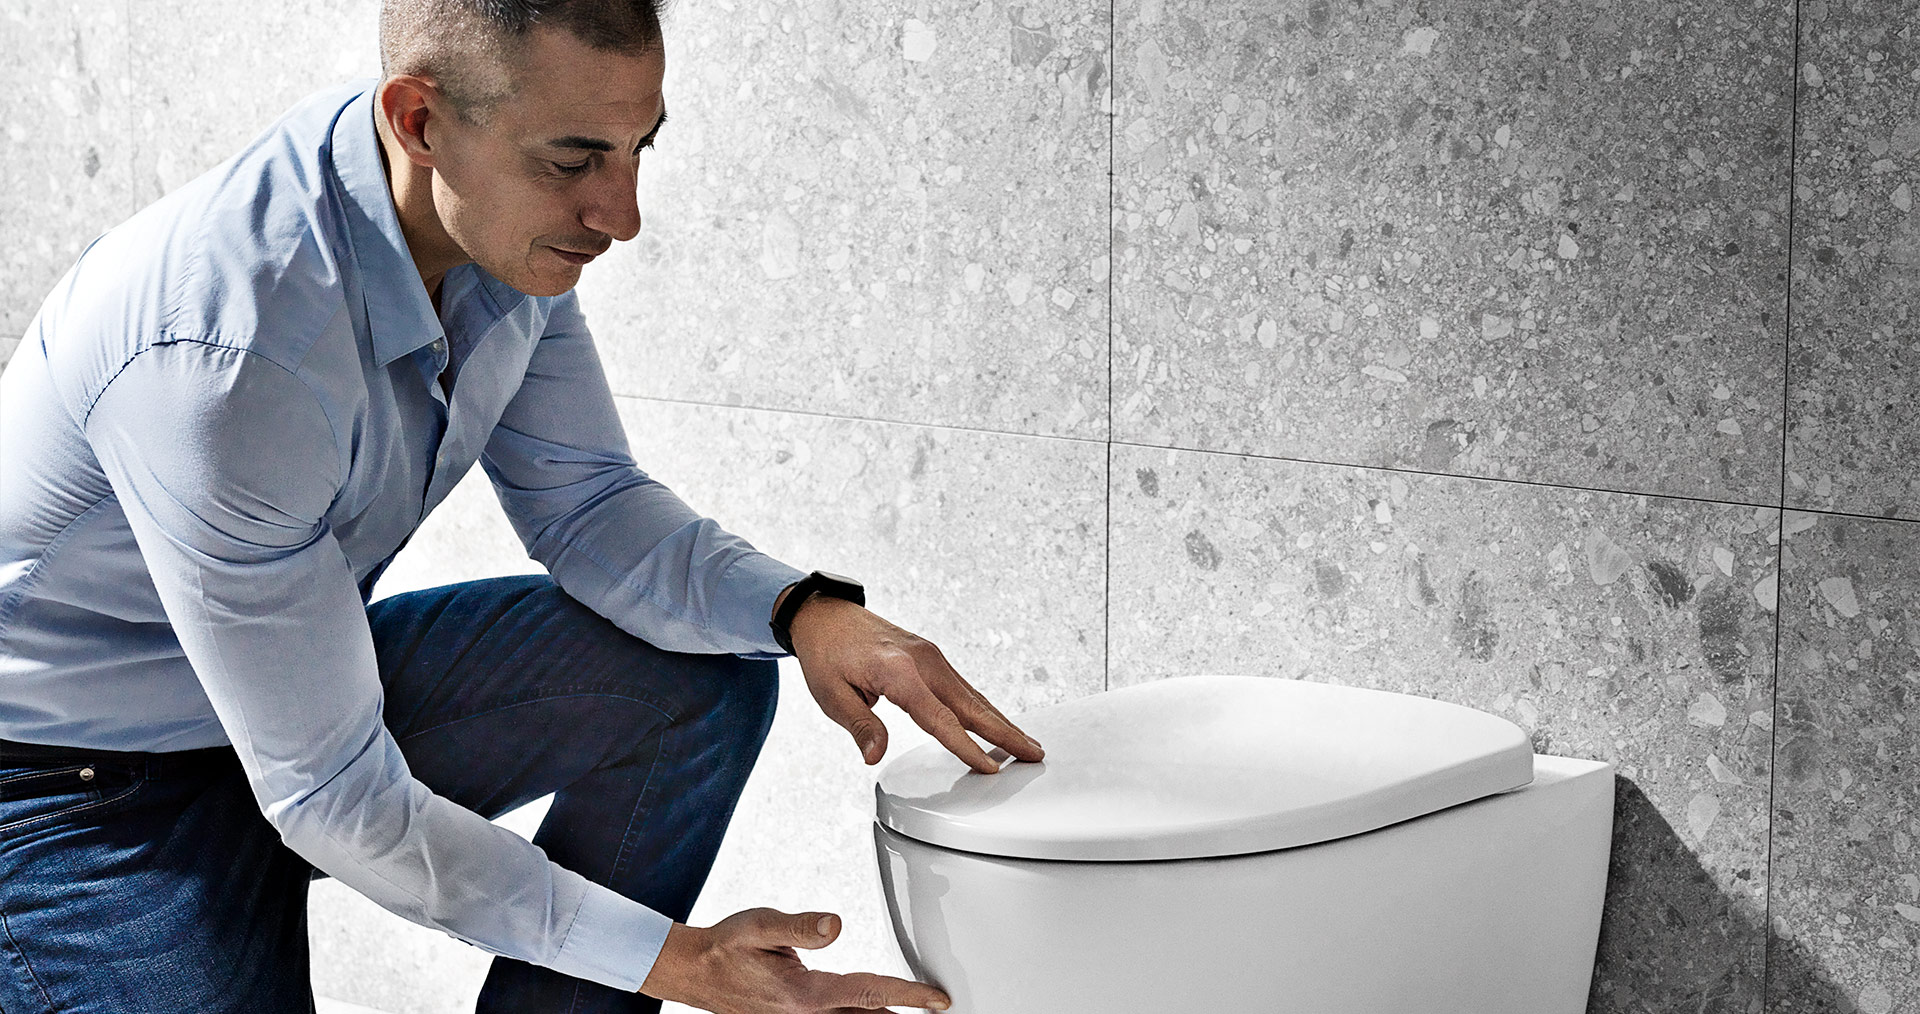 Product manager Fabio Peyla inspecting a new toilet model for Geberit